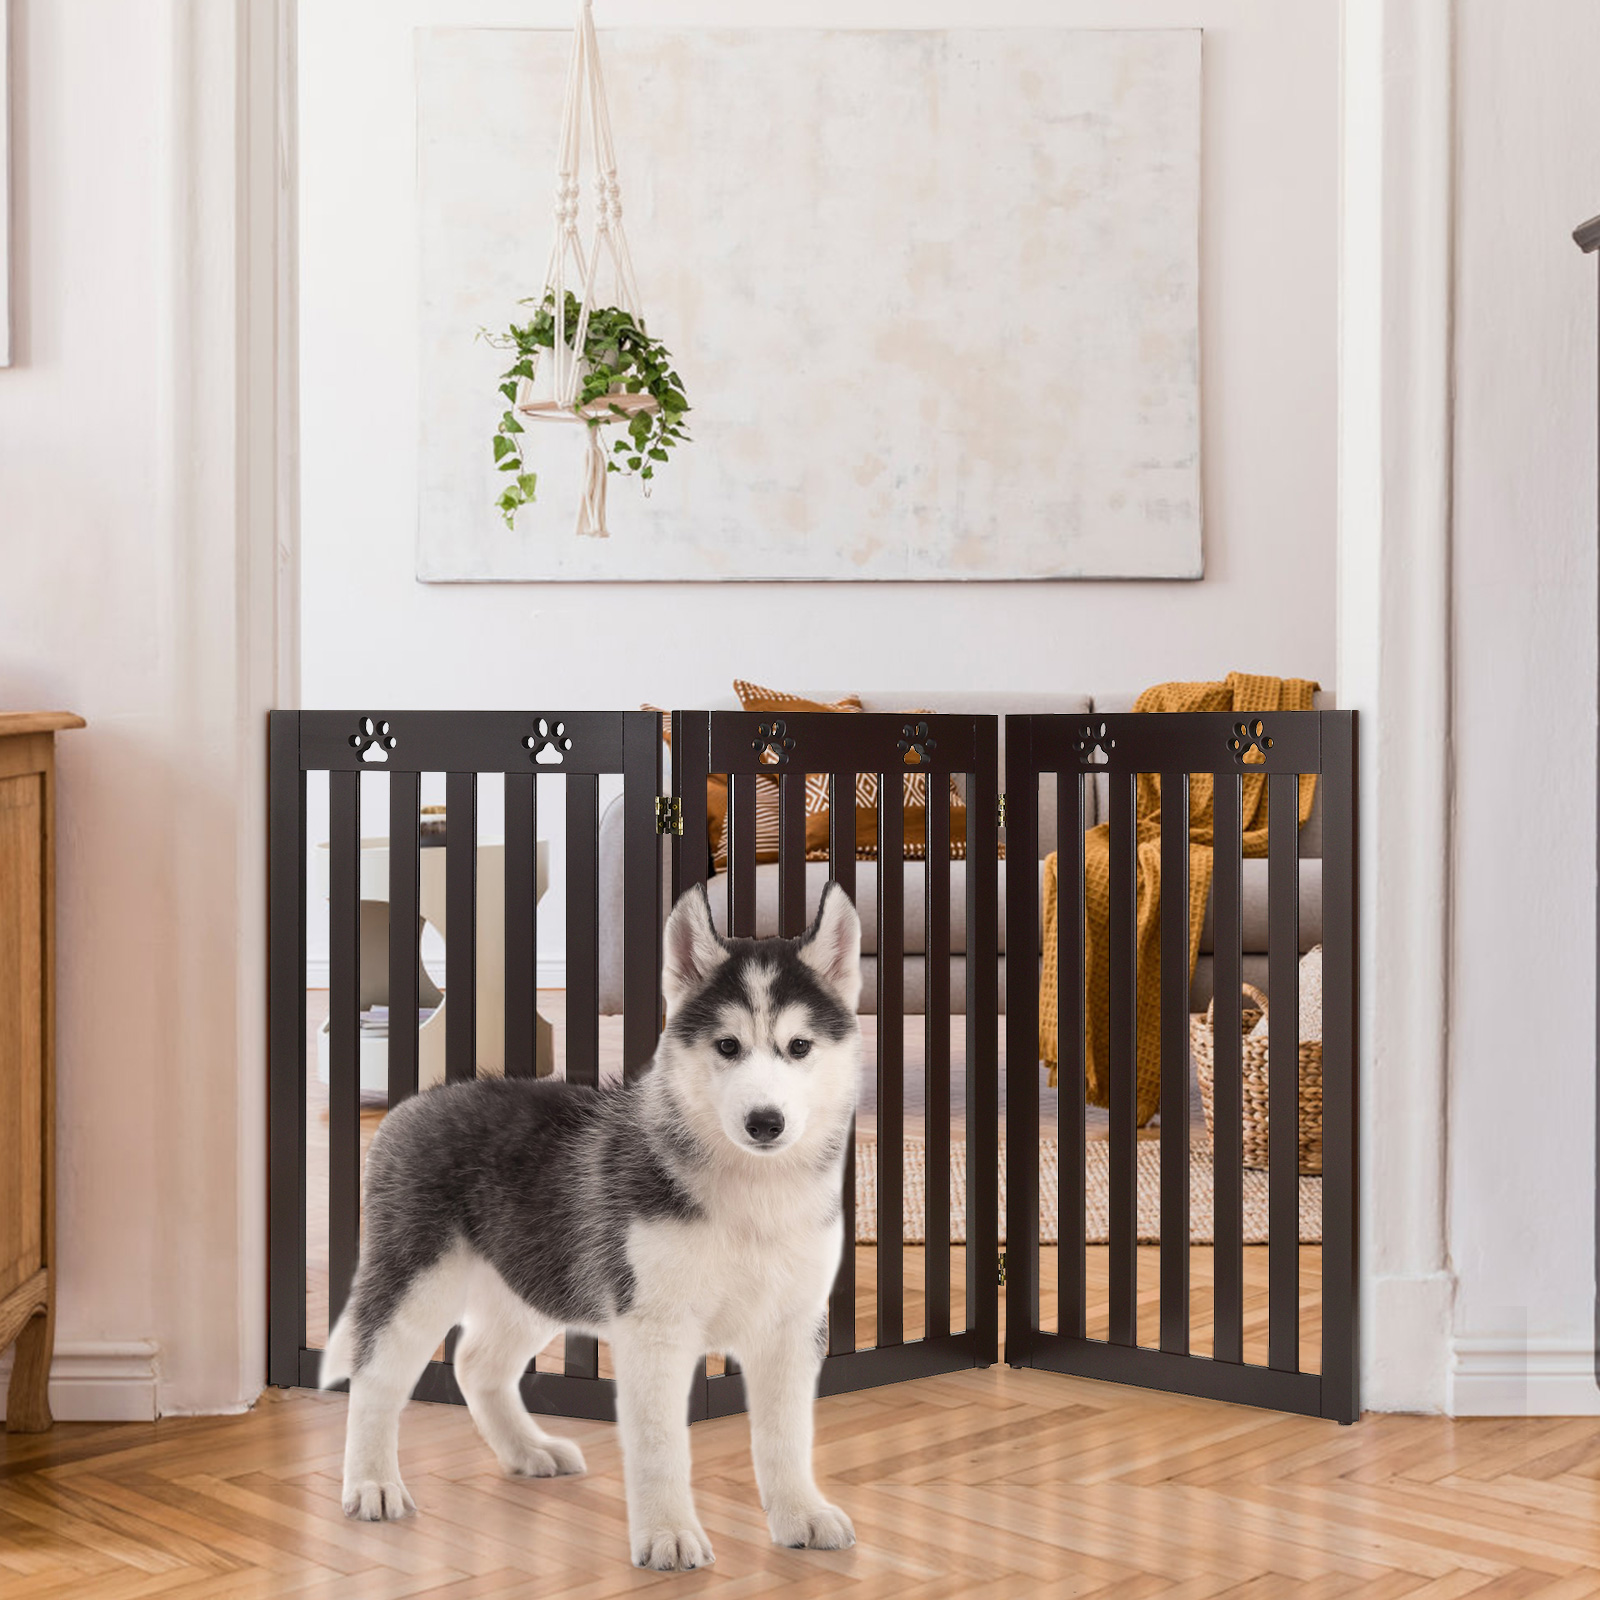 COSTWAY Foldable Pet Gate Stairs 152 x 60cm, White 60cm Step Over Safety Fence for Doorway Wooden Freestanding Dog Barrier with 360/° Flexible Hinges